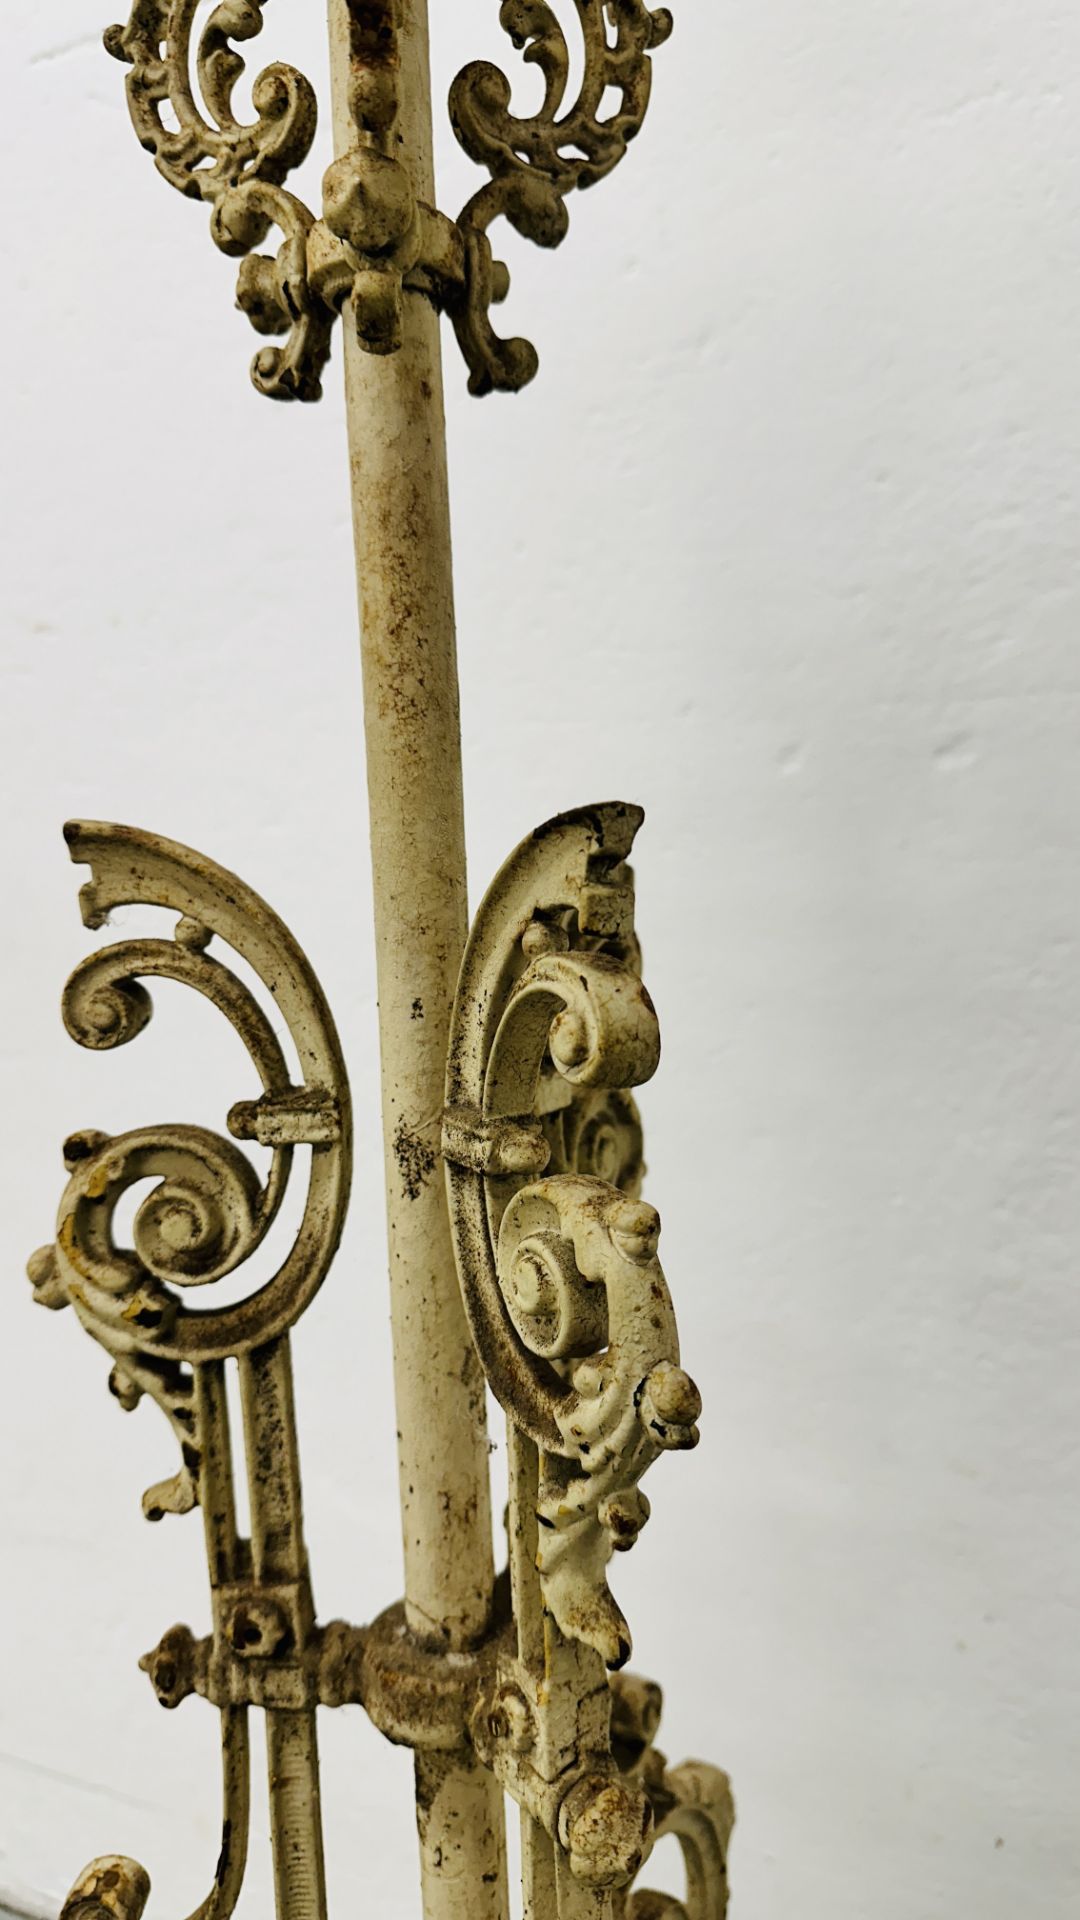 HIGHLY DECORATIVE CAST IRON LAMP STANDARD FOR RESTORATION. - Image 7 of 7